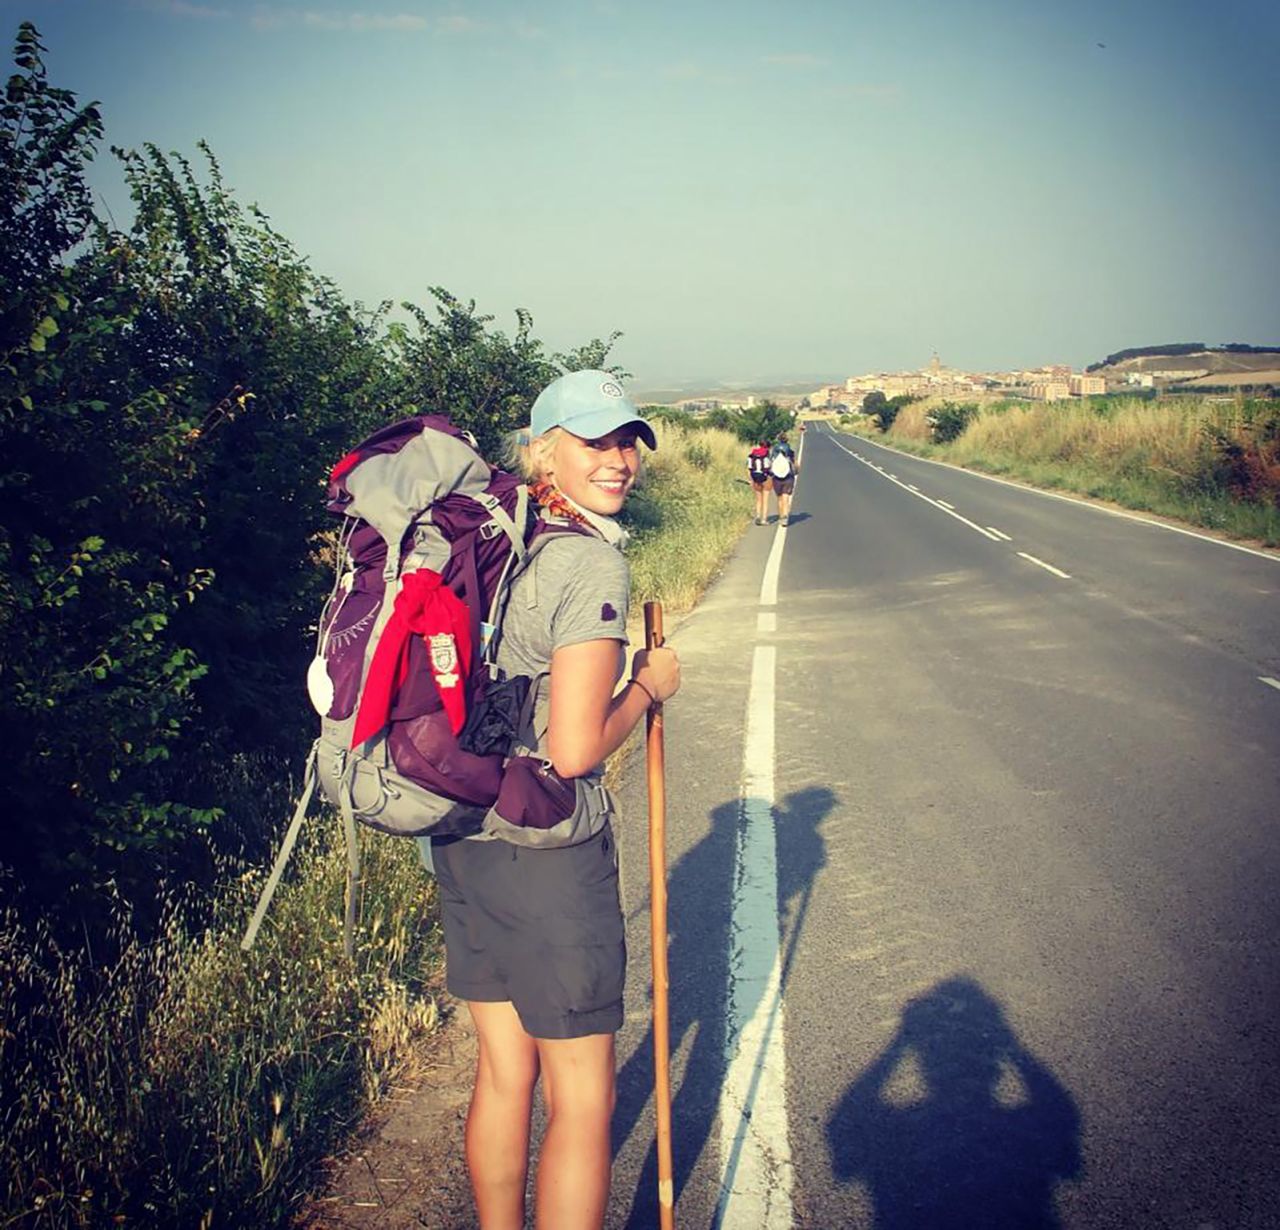 Here's Loni, pictured hiking the Camino de Santiago.